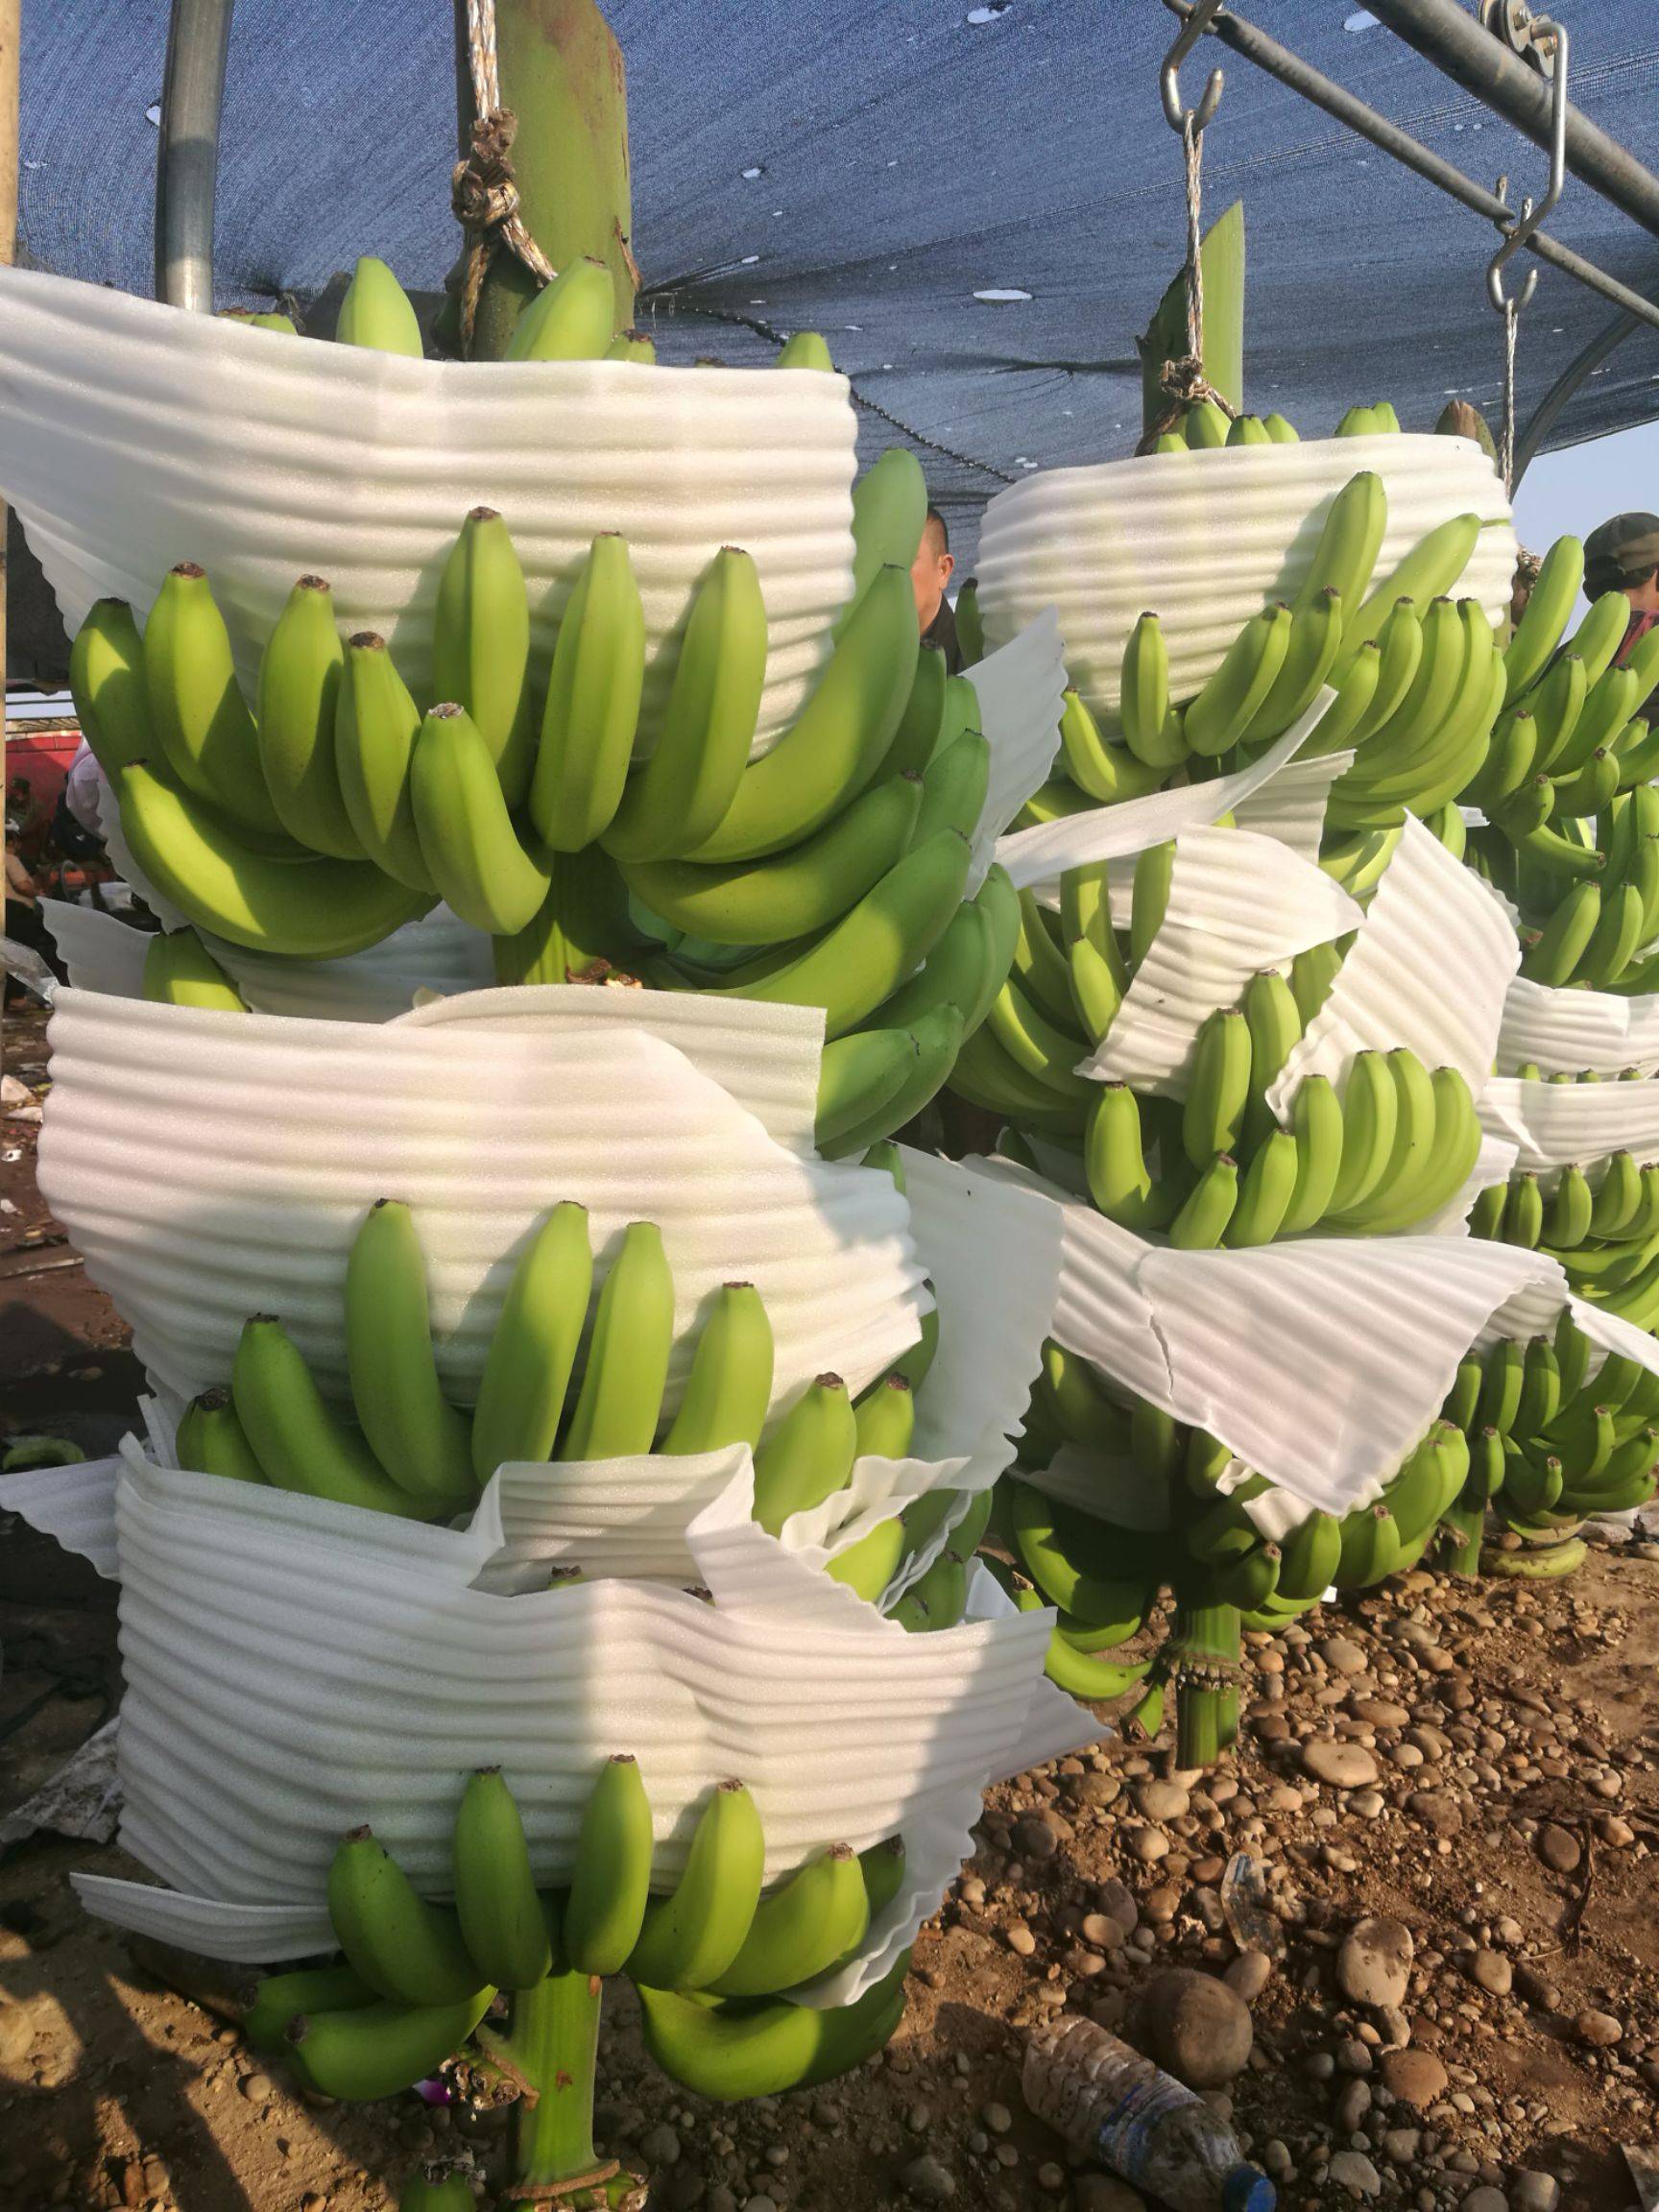 Philippine banana industry requires government to increase investment